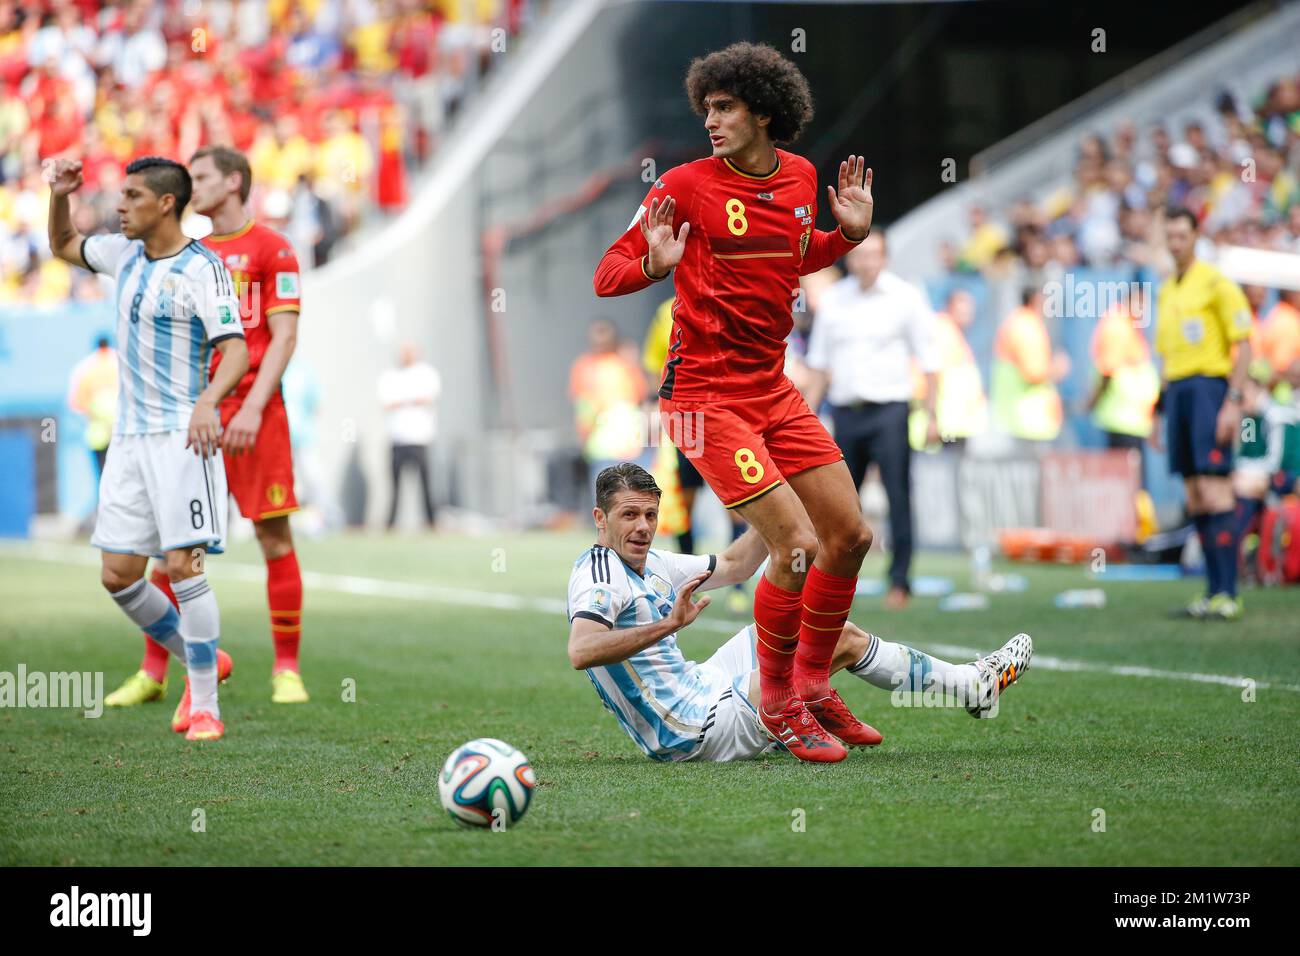 Belgium's Marouane Fellaini pictured during the quarter final match between Belgian national soccer team Red Devils and Argentina, in Estadio Nacional Mane Garrincha, in Brasilia, Brazil, during the 2014 FIFA World Cup, Saturday 05 July 2014.  Stock Photo